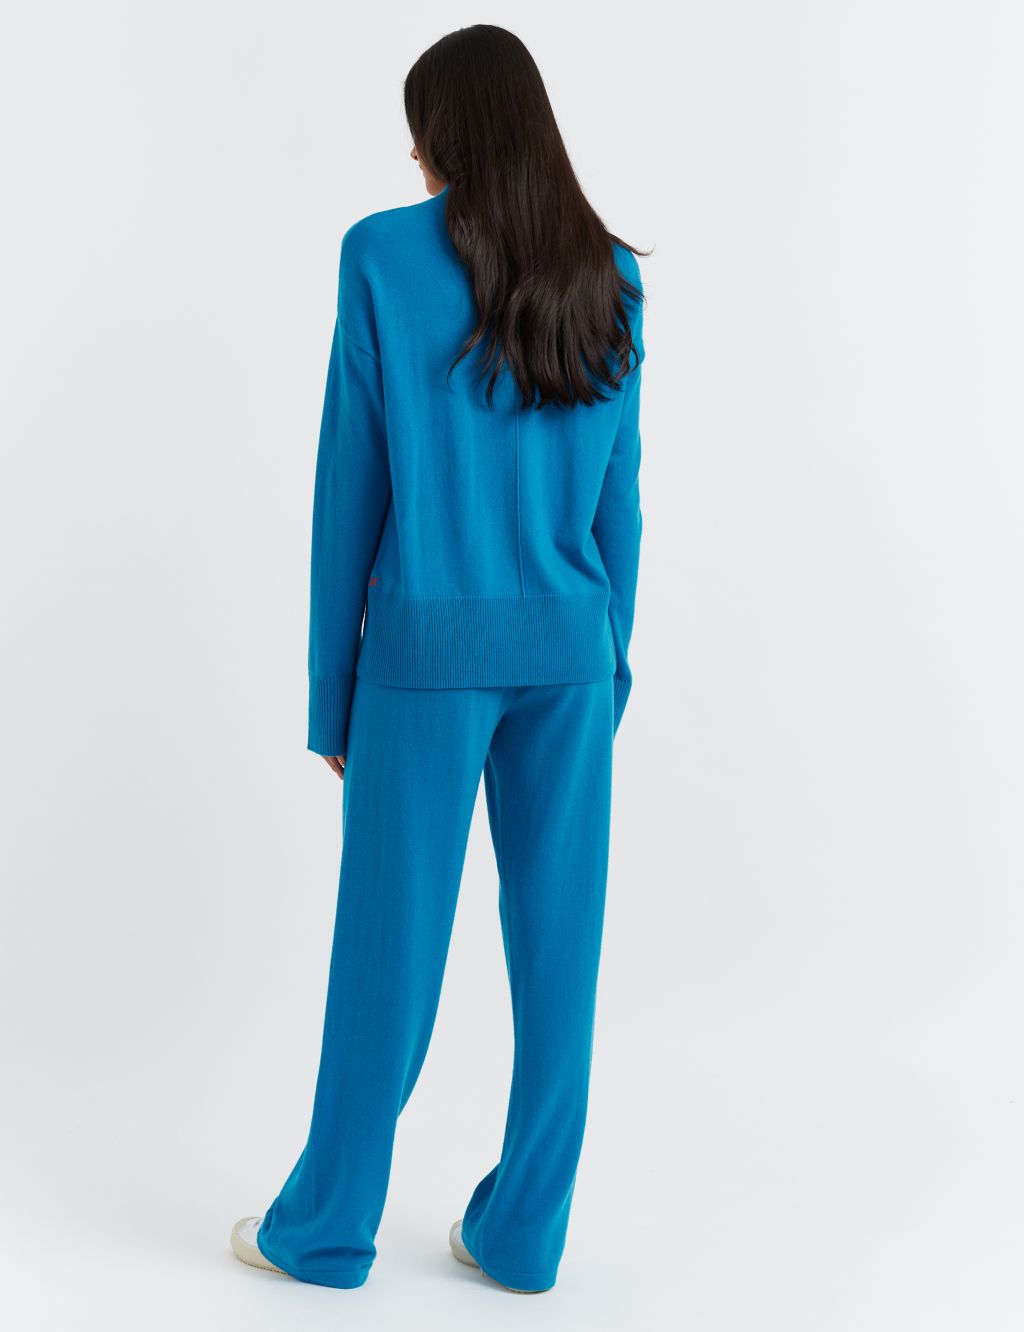 Wool Rich Relaxed Jumper with Cashmere image 3